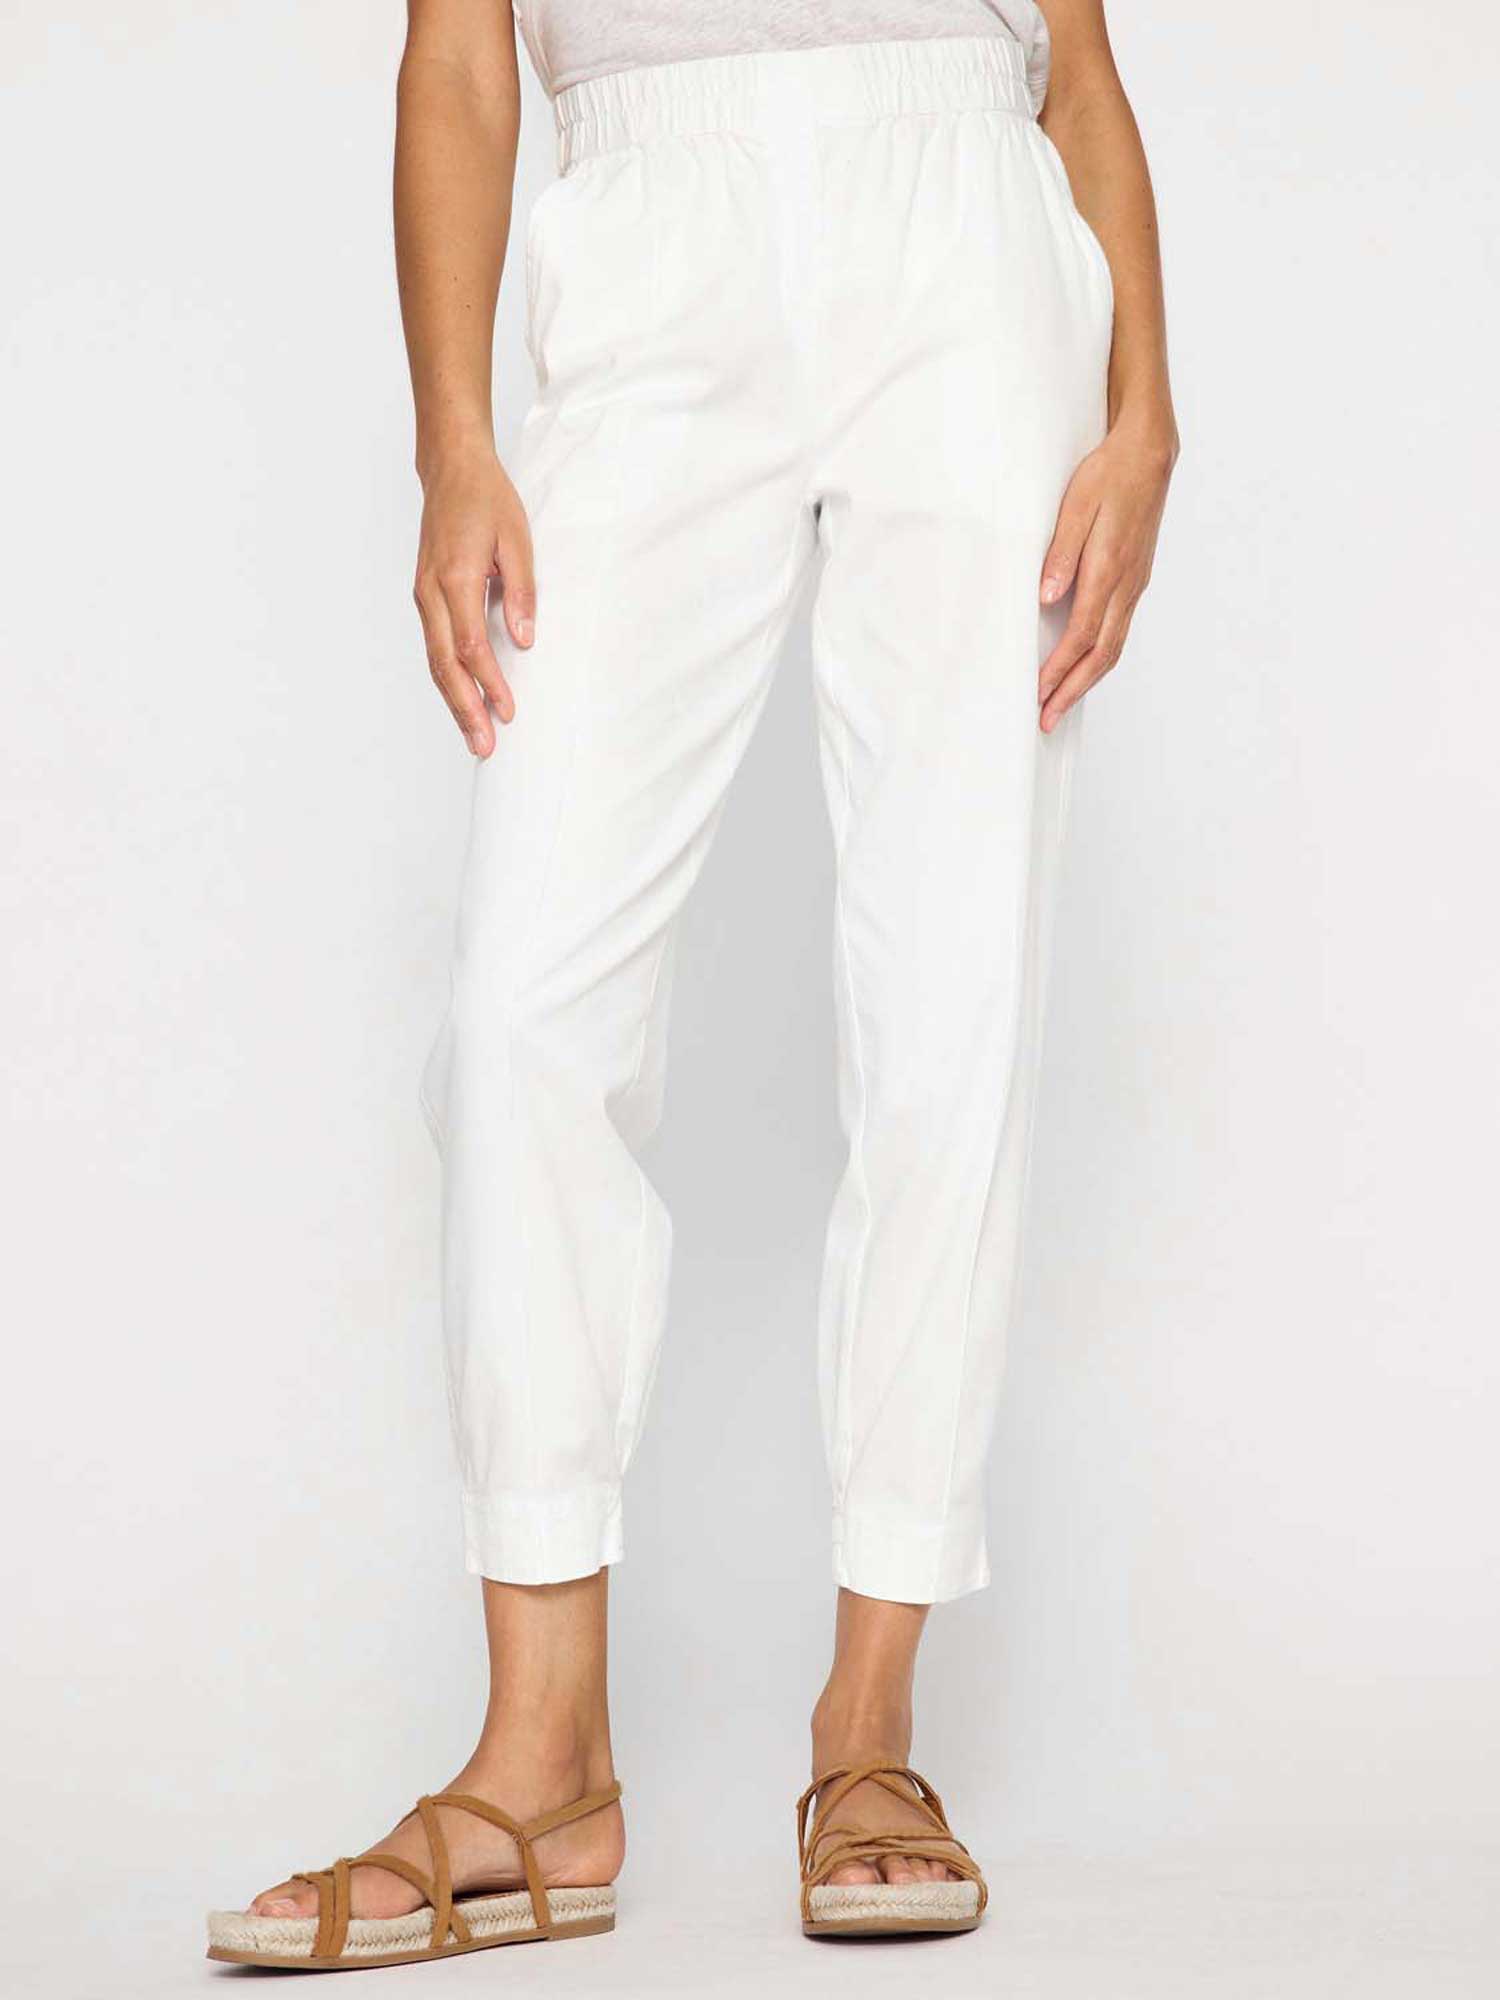 Noa white cropped jogger pant front view